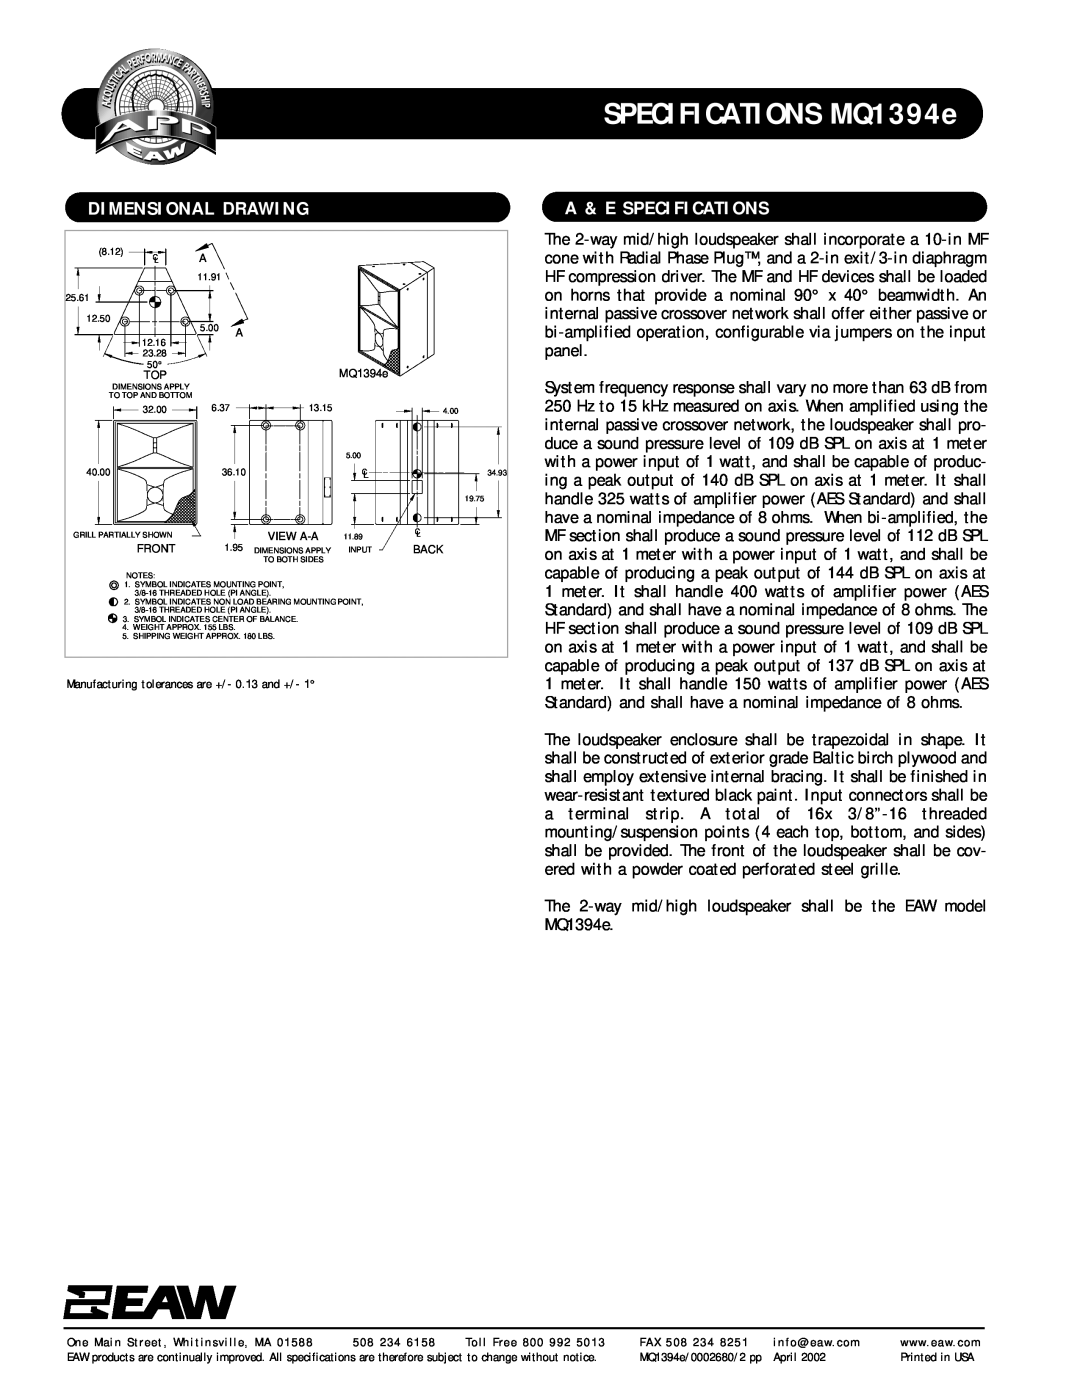 EAW specifications Dimensional Drawing, A & E Specifications, SPECIFICATIONS MQ1394e 